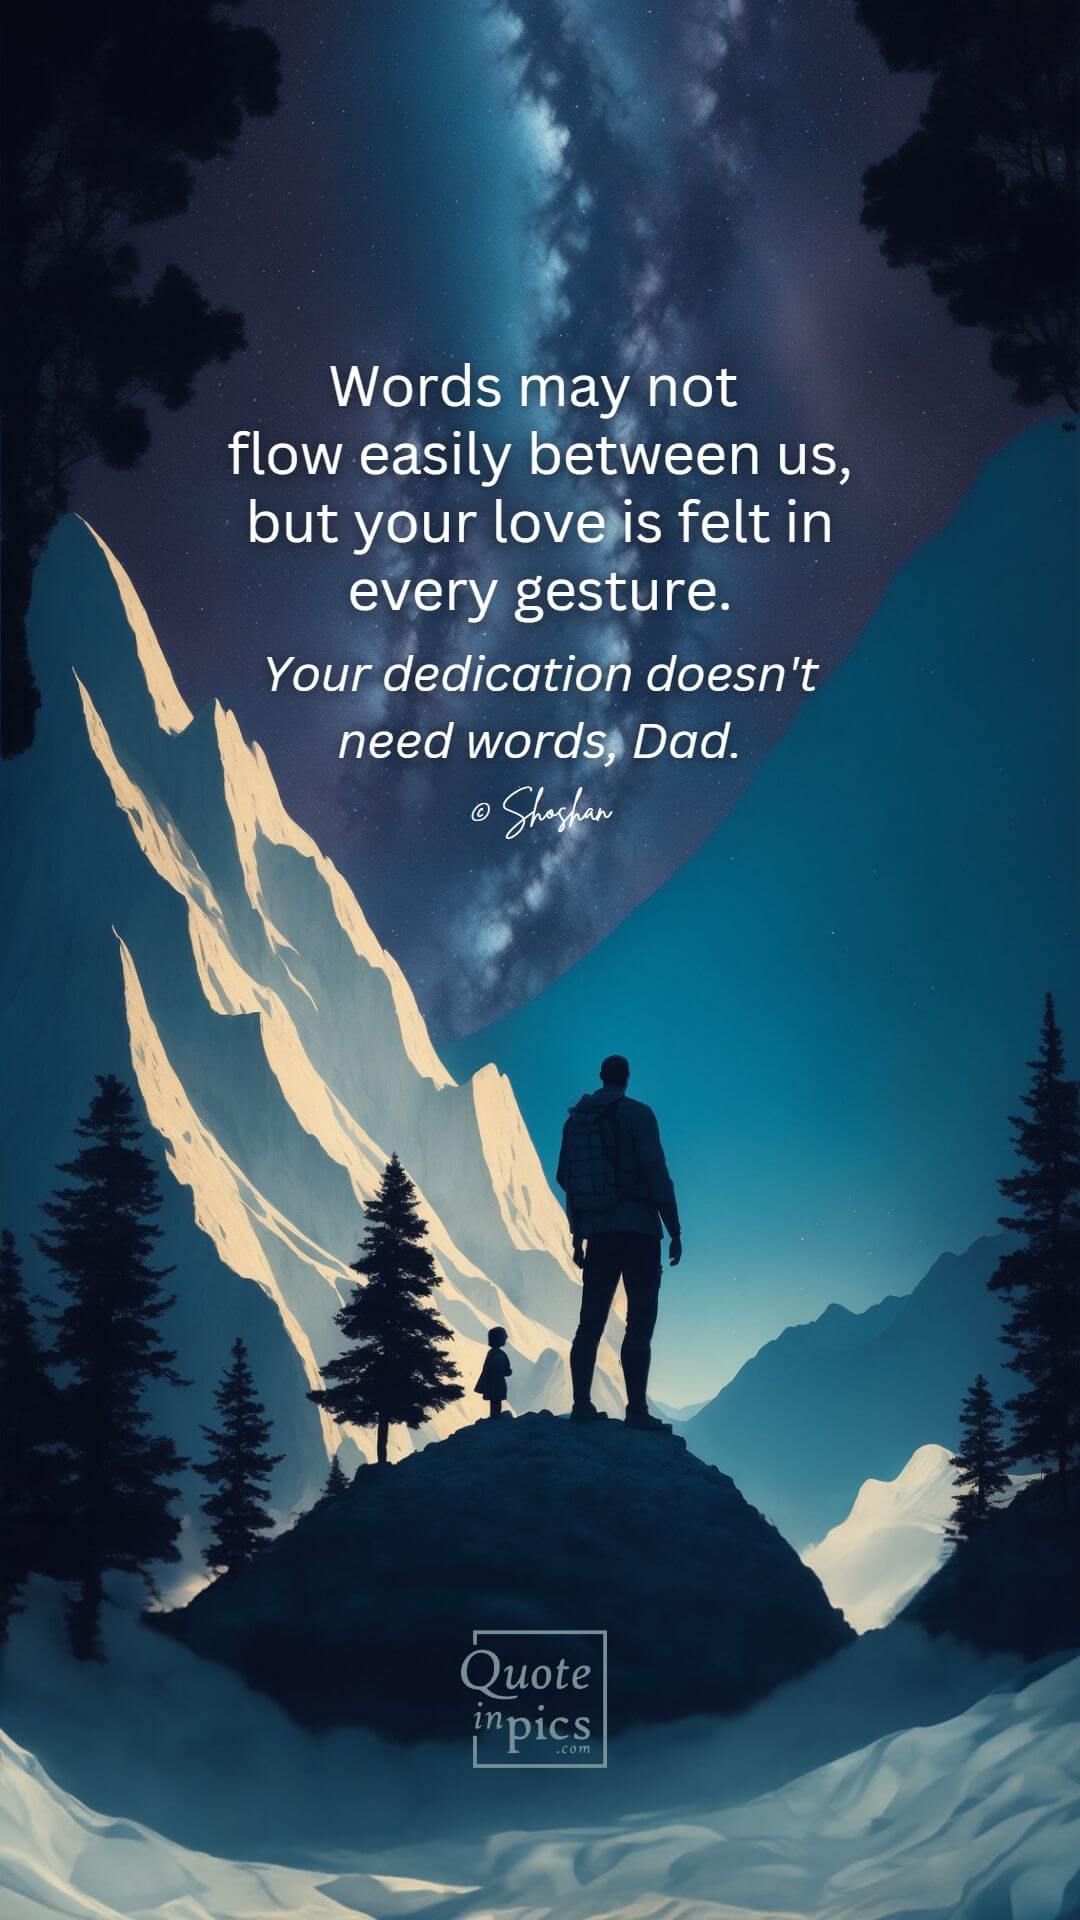 Dad: Words may not flow easily between us, but your love is felt in every gesture.